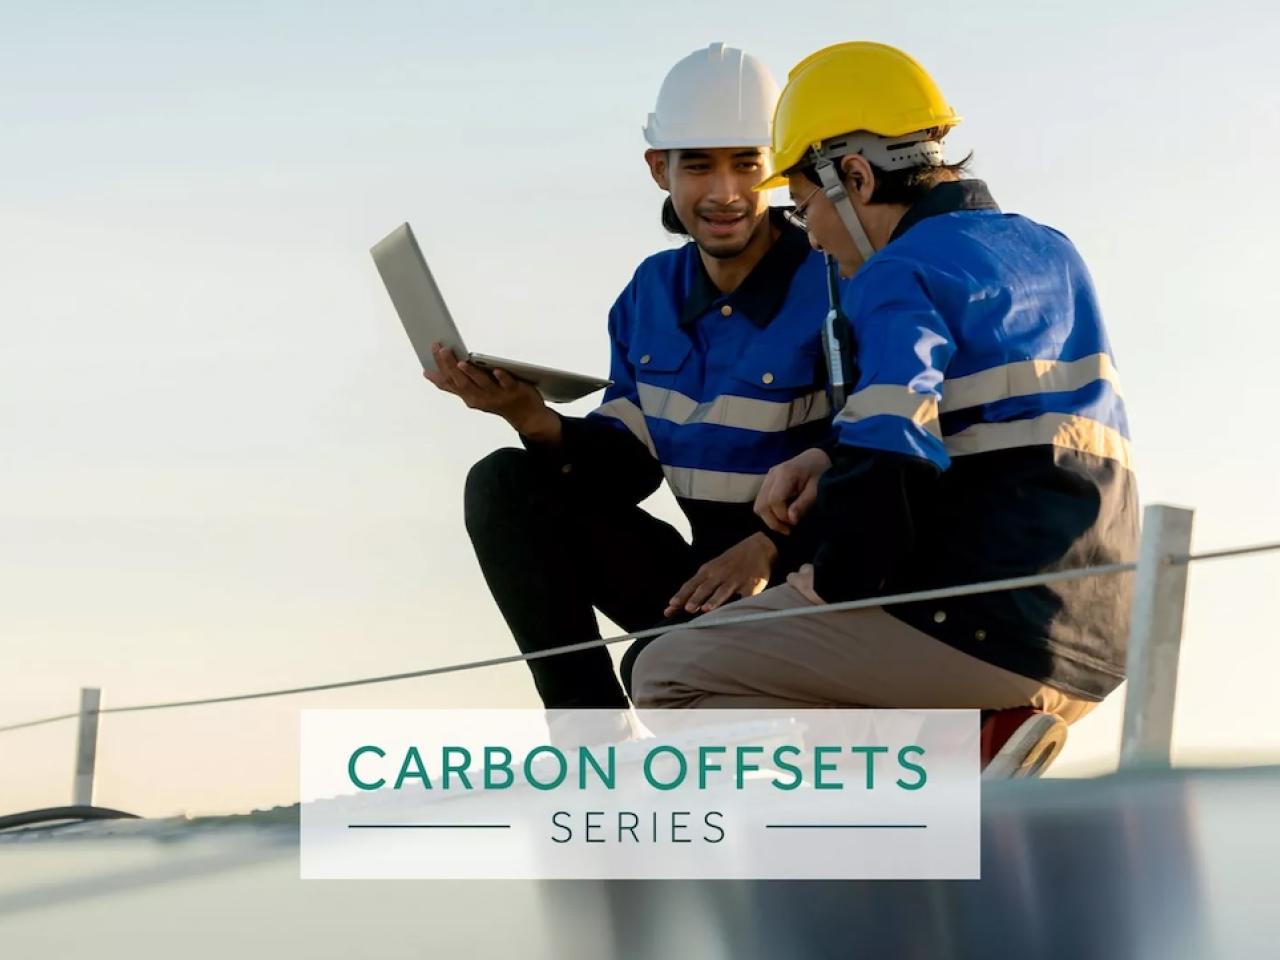 Carbon Offsets Series: Two technicians working on a solar panel.